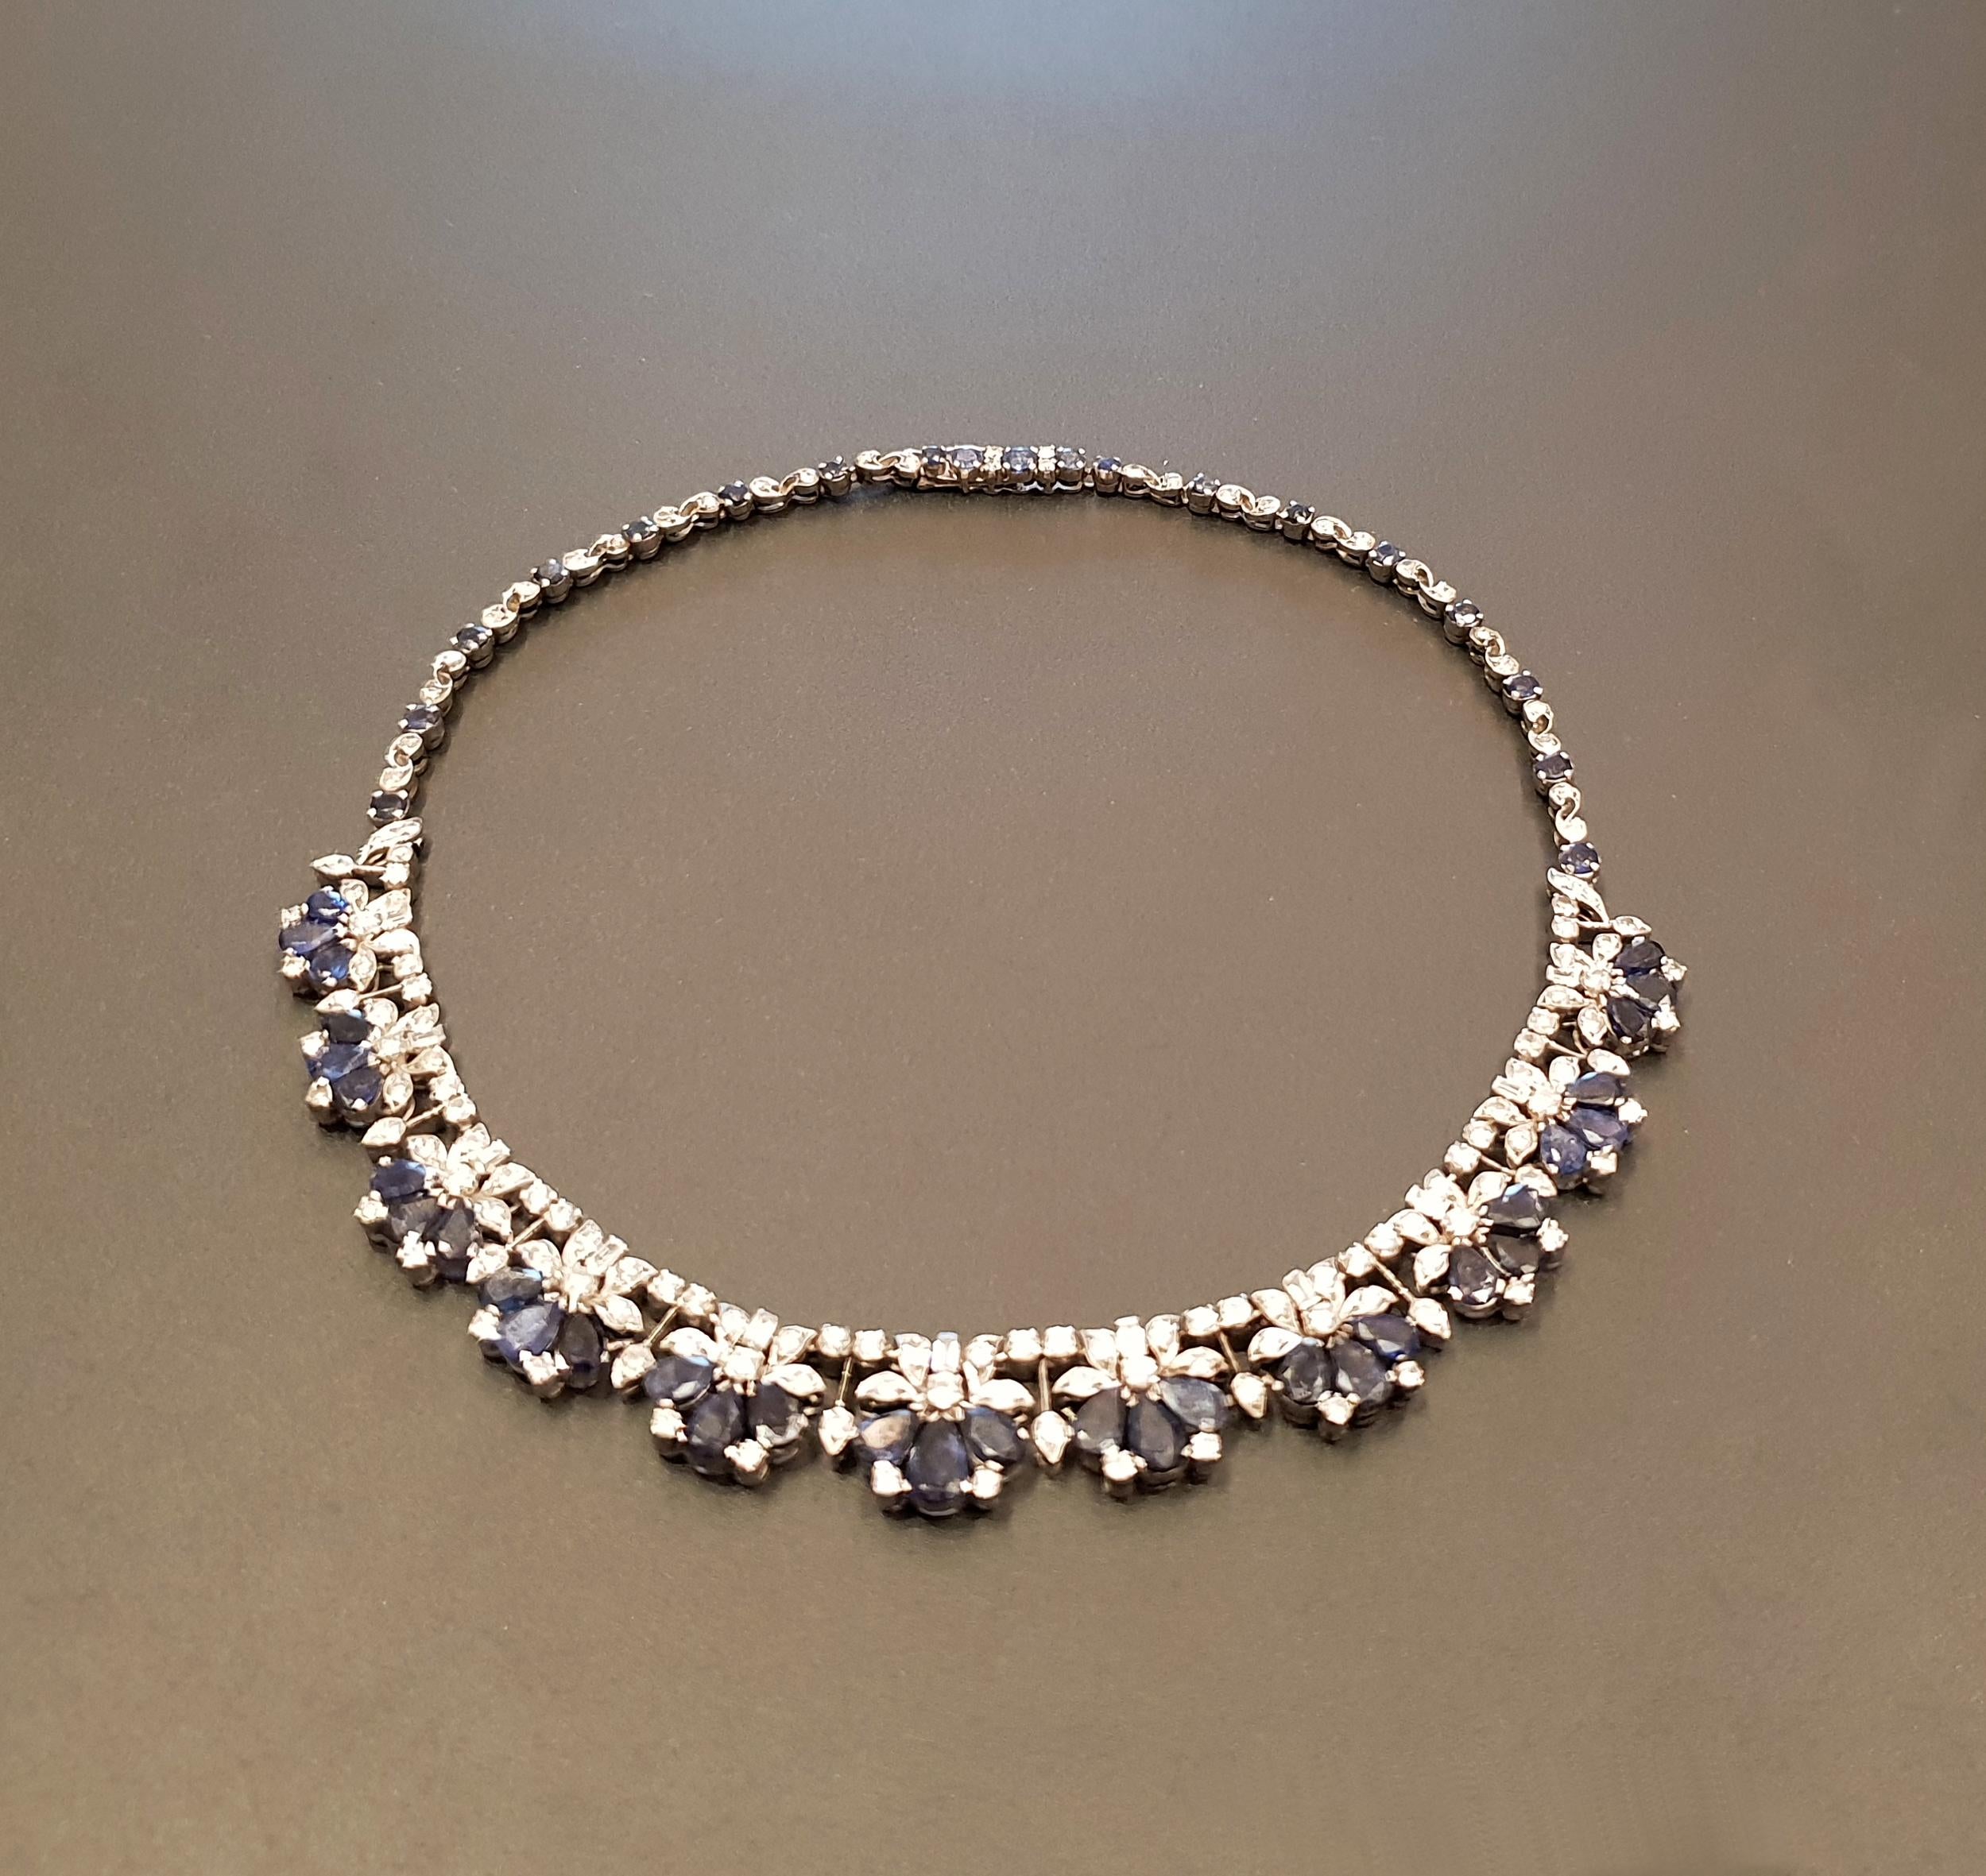 Germany, 1920s. Necklace with 33 navette-cut blue sapphire and 20 round shaped blue sapphire with totally weight circa 36,07 carats. Accompanied by brilliant-cut, baguette-cut diamonds weighing approximately 7,48 carats. 
Mounted in platinum.